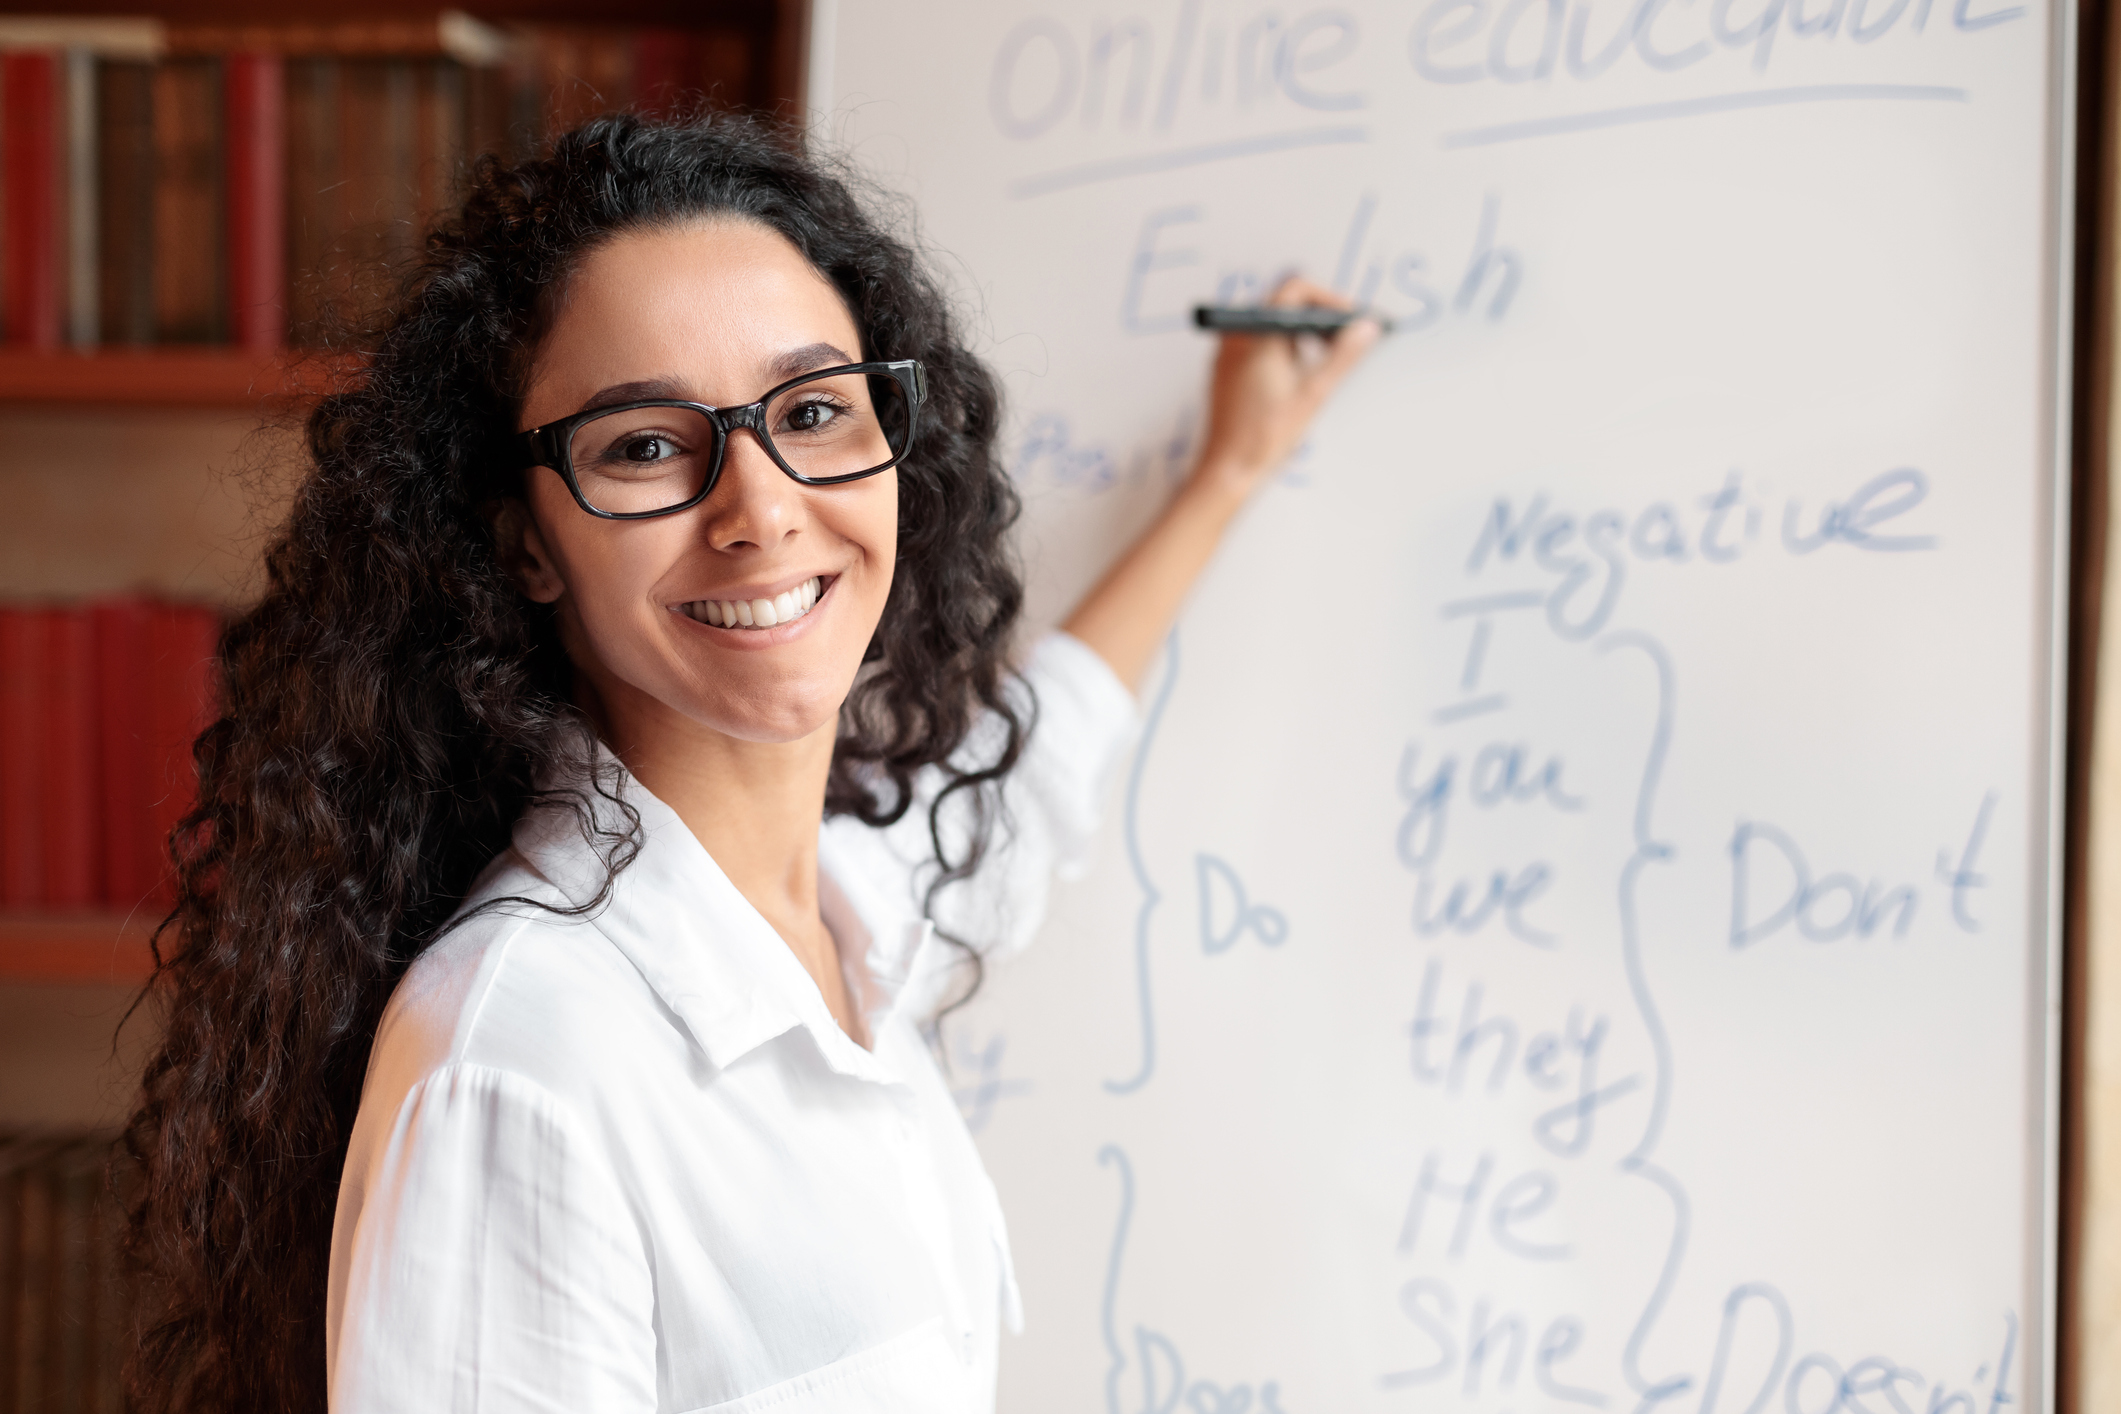 Education And Learning Concept. Portrait of smiling female teacher standing at whiteboard, explaining grammar rules to students. Excited woman in glasses looking at camera, writing on the board